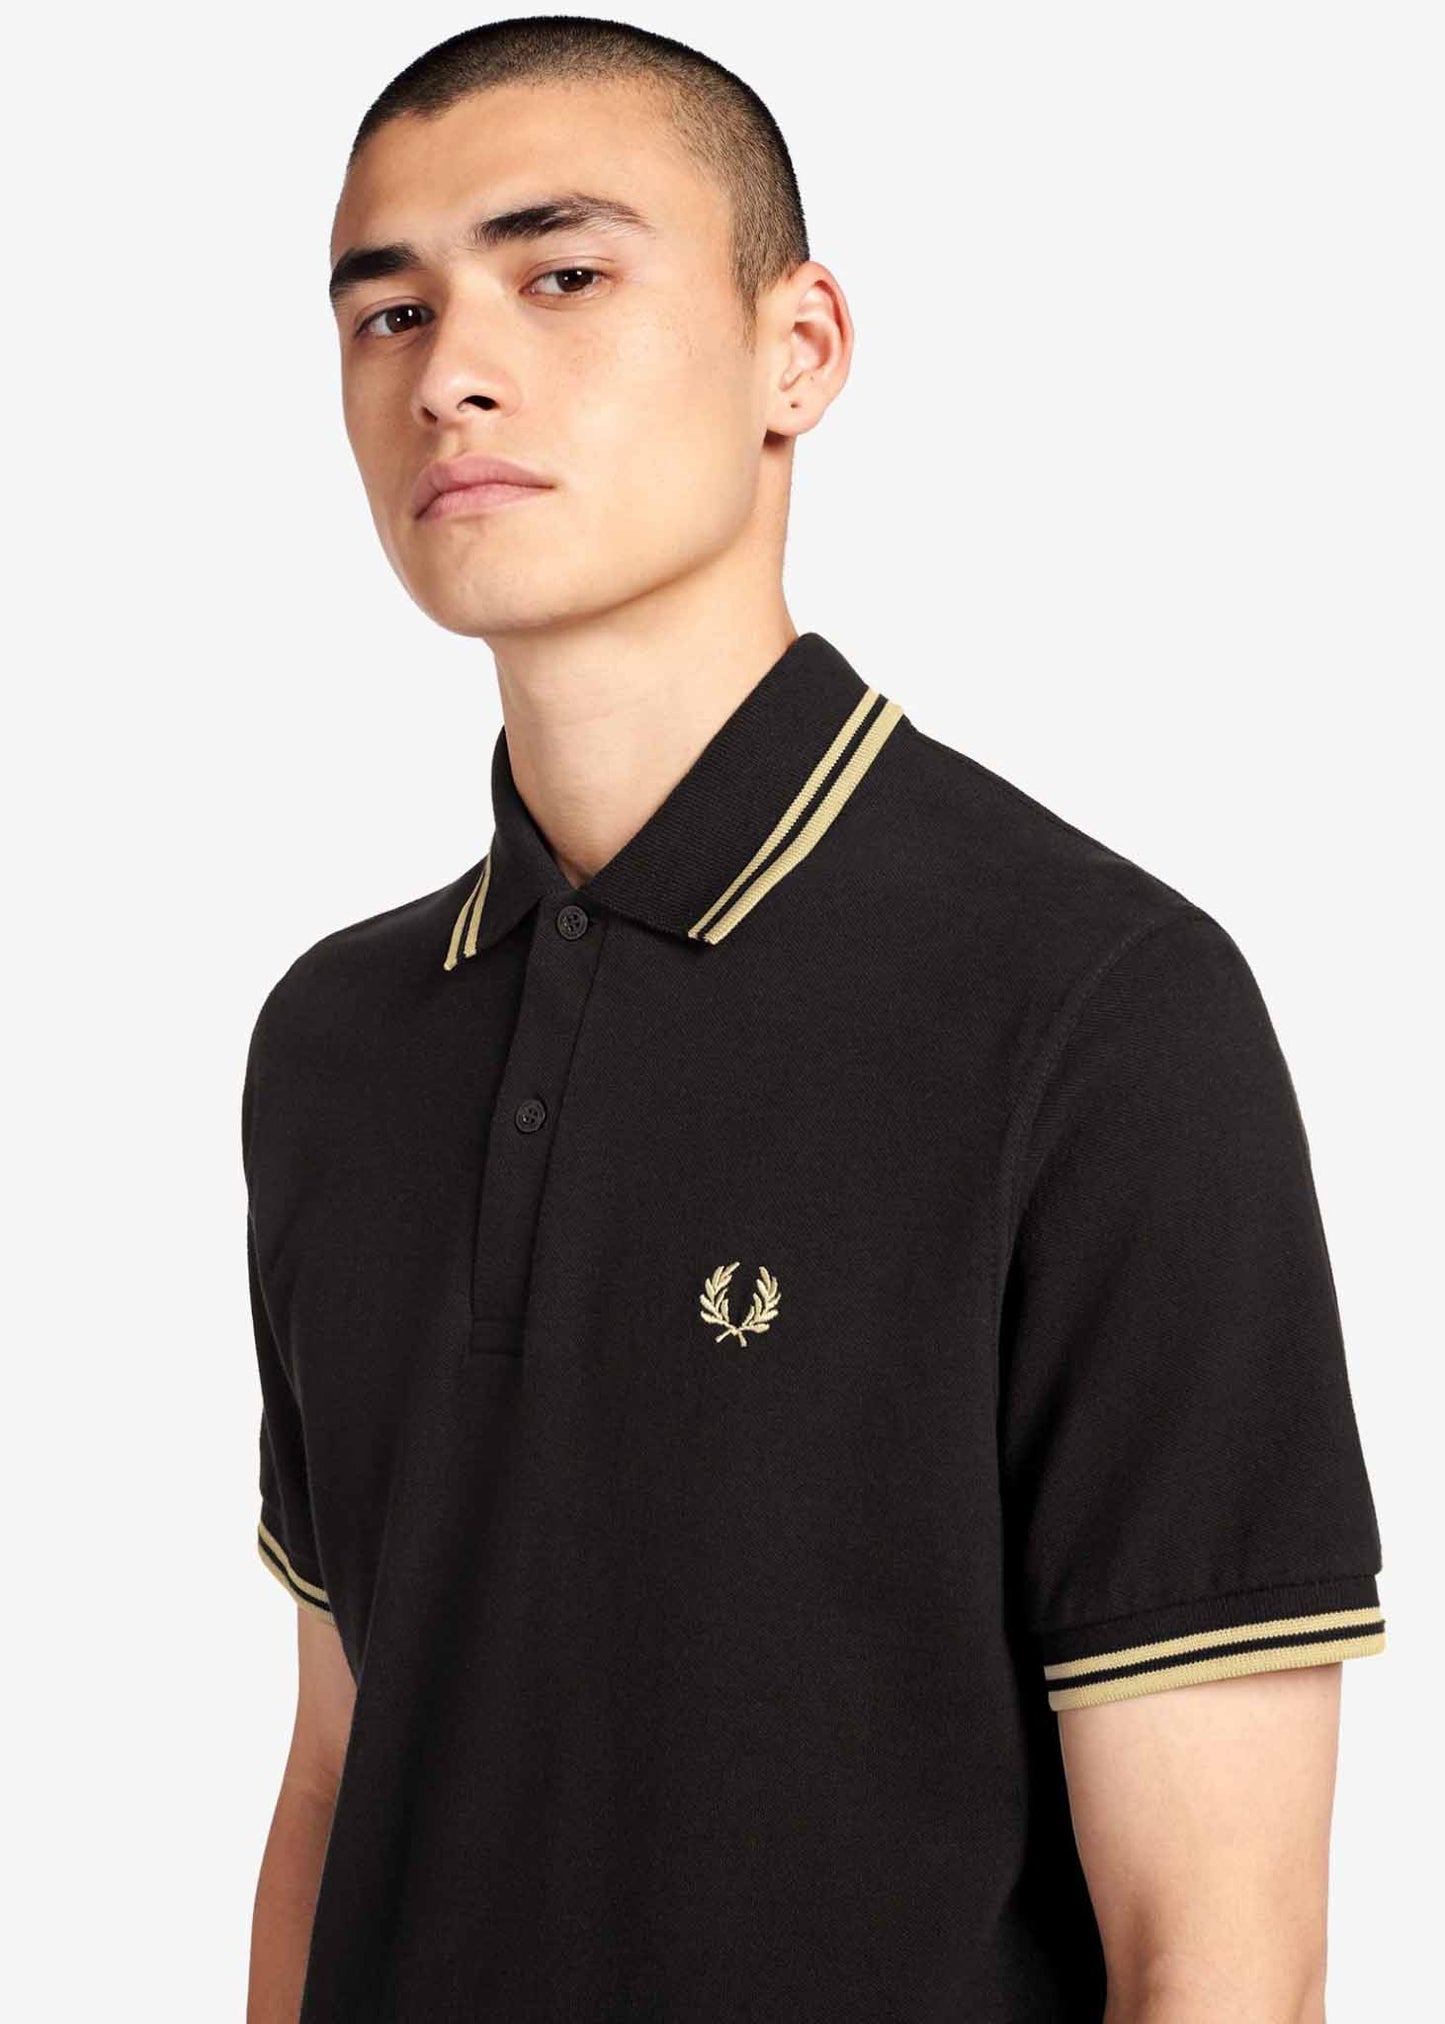 Twin tipped fred perry shirt - black champagne